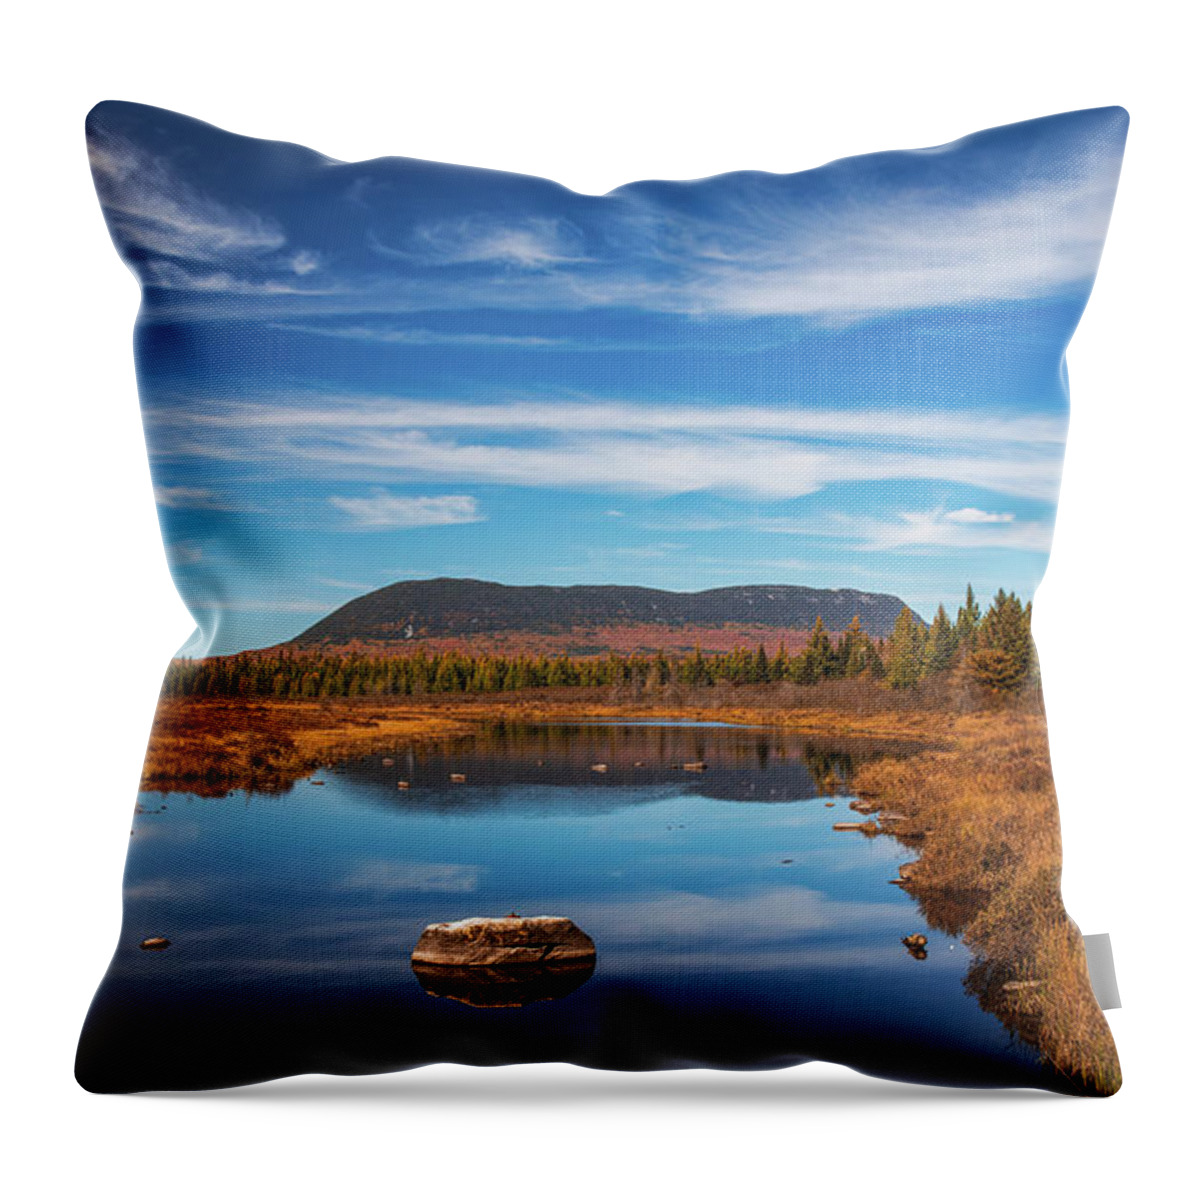 Lazy Tom Bog Maine Throw Pillow featuring the photograph Lazy Tom Bog Maine by Dan Sproul